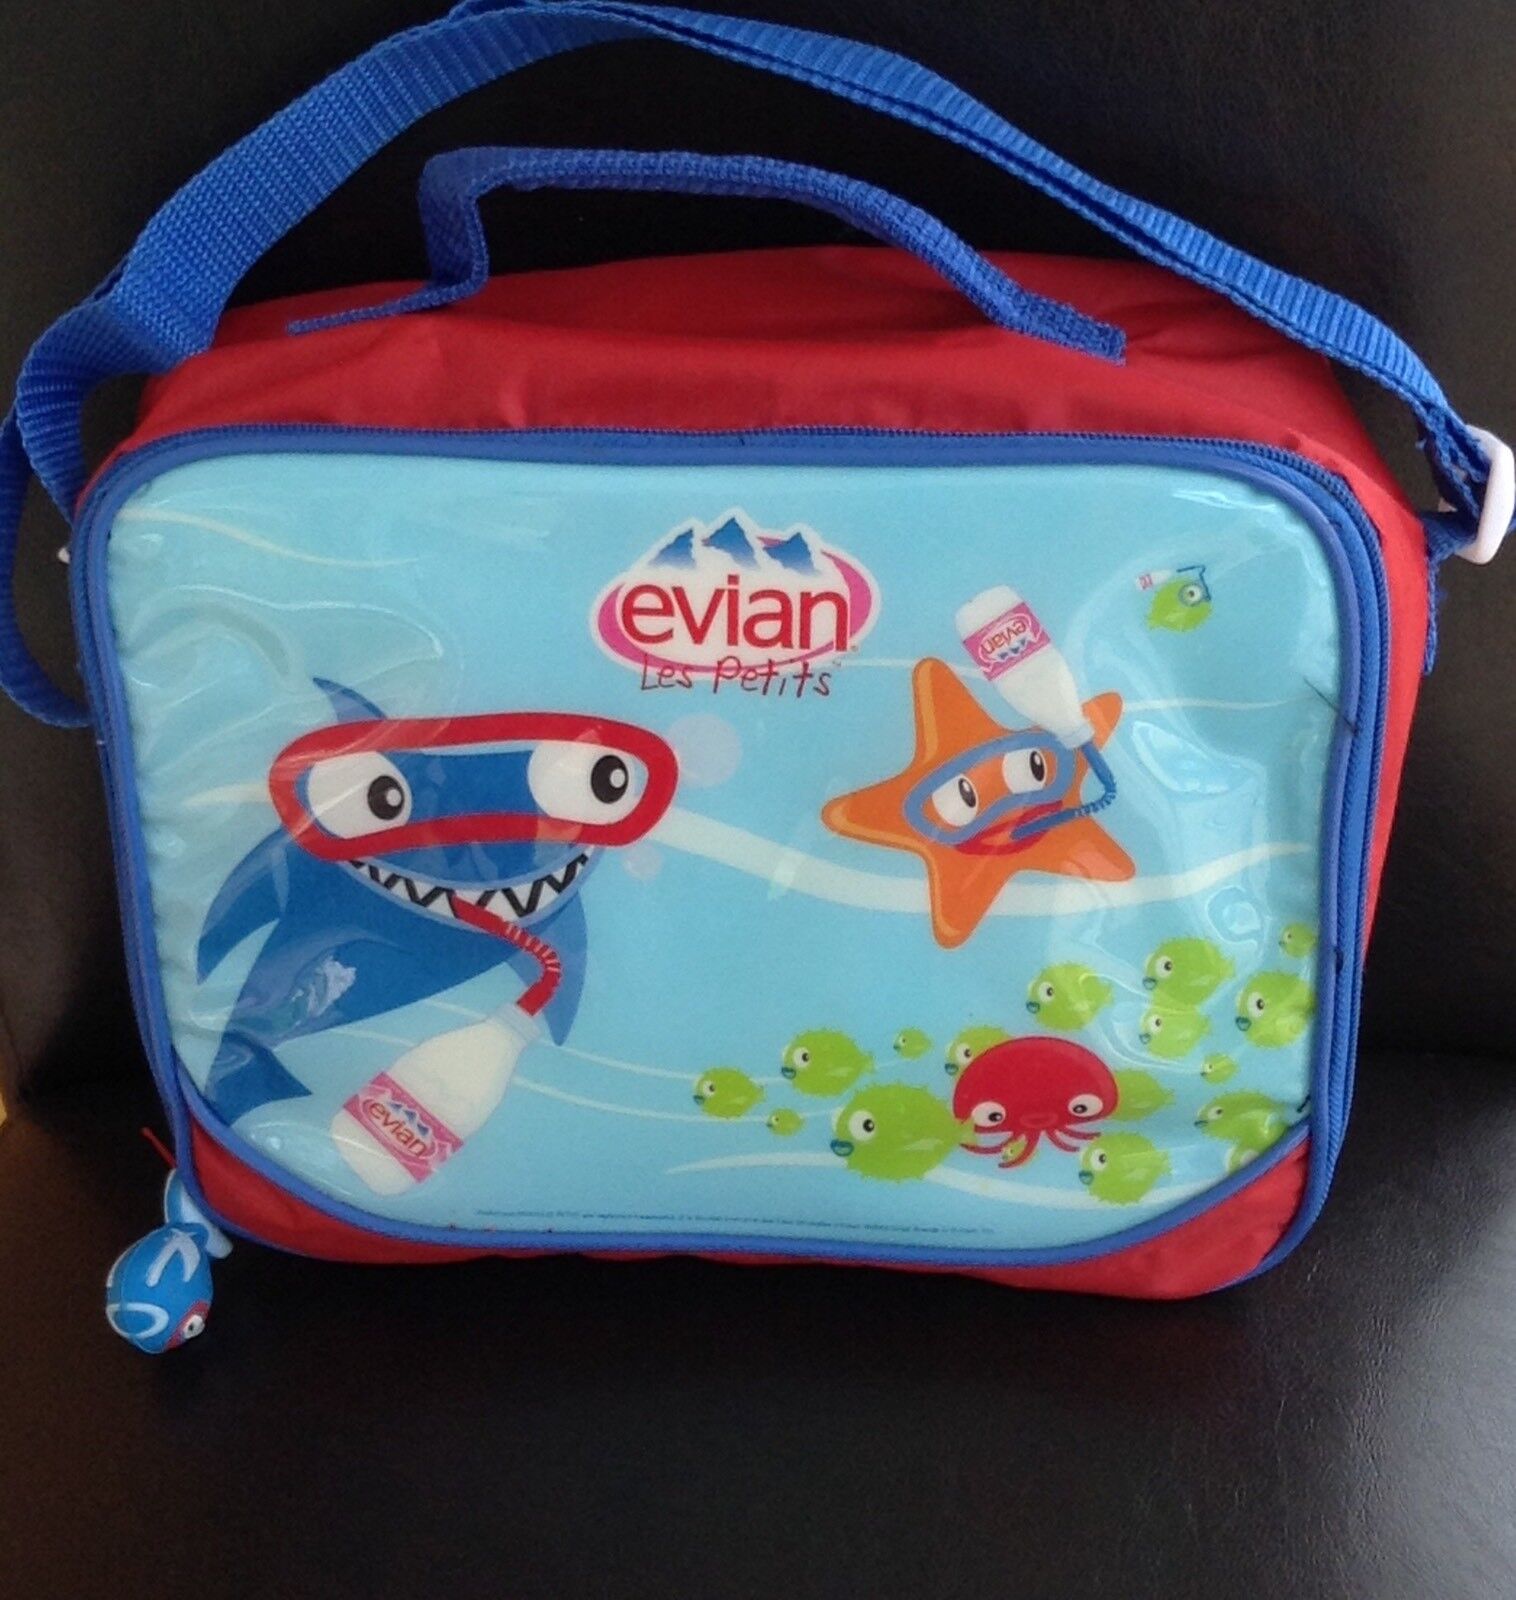 2008 EVIAN WATER Les Petits Child\'s Lunch Bag With Fish Pulls Hard To Find Promo